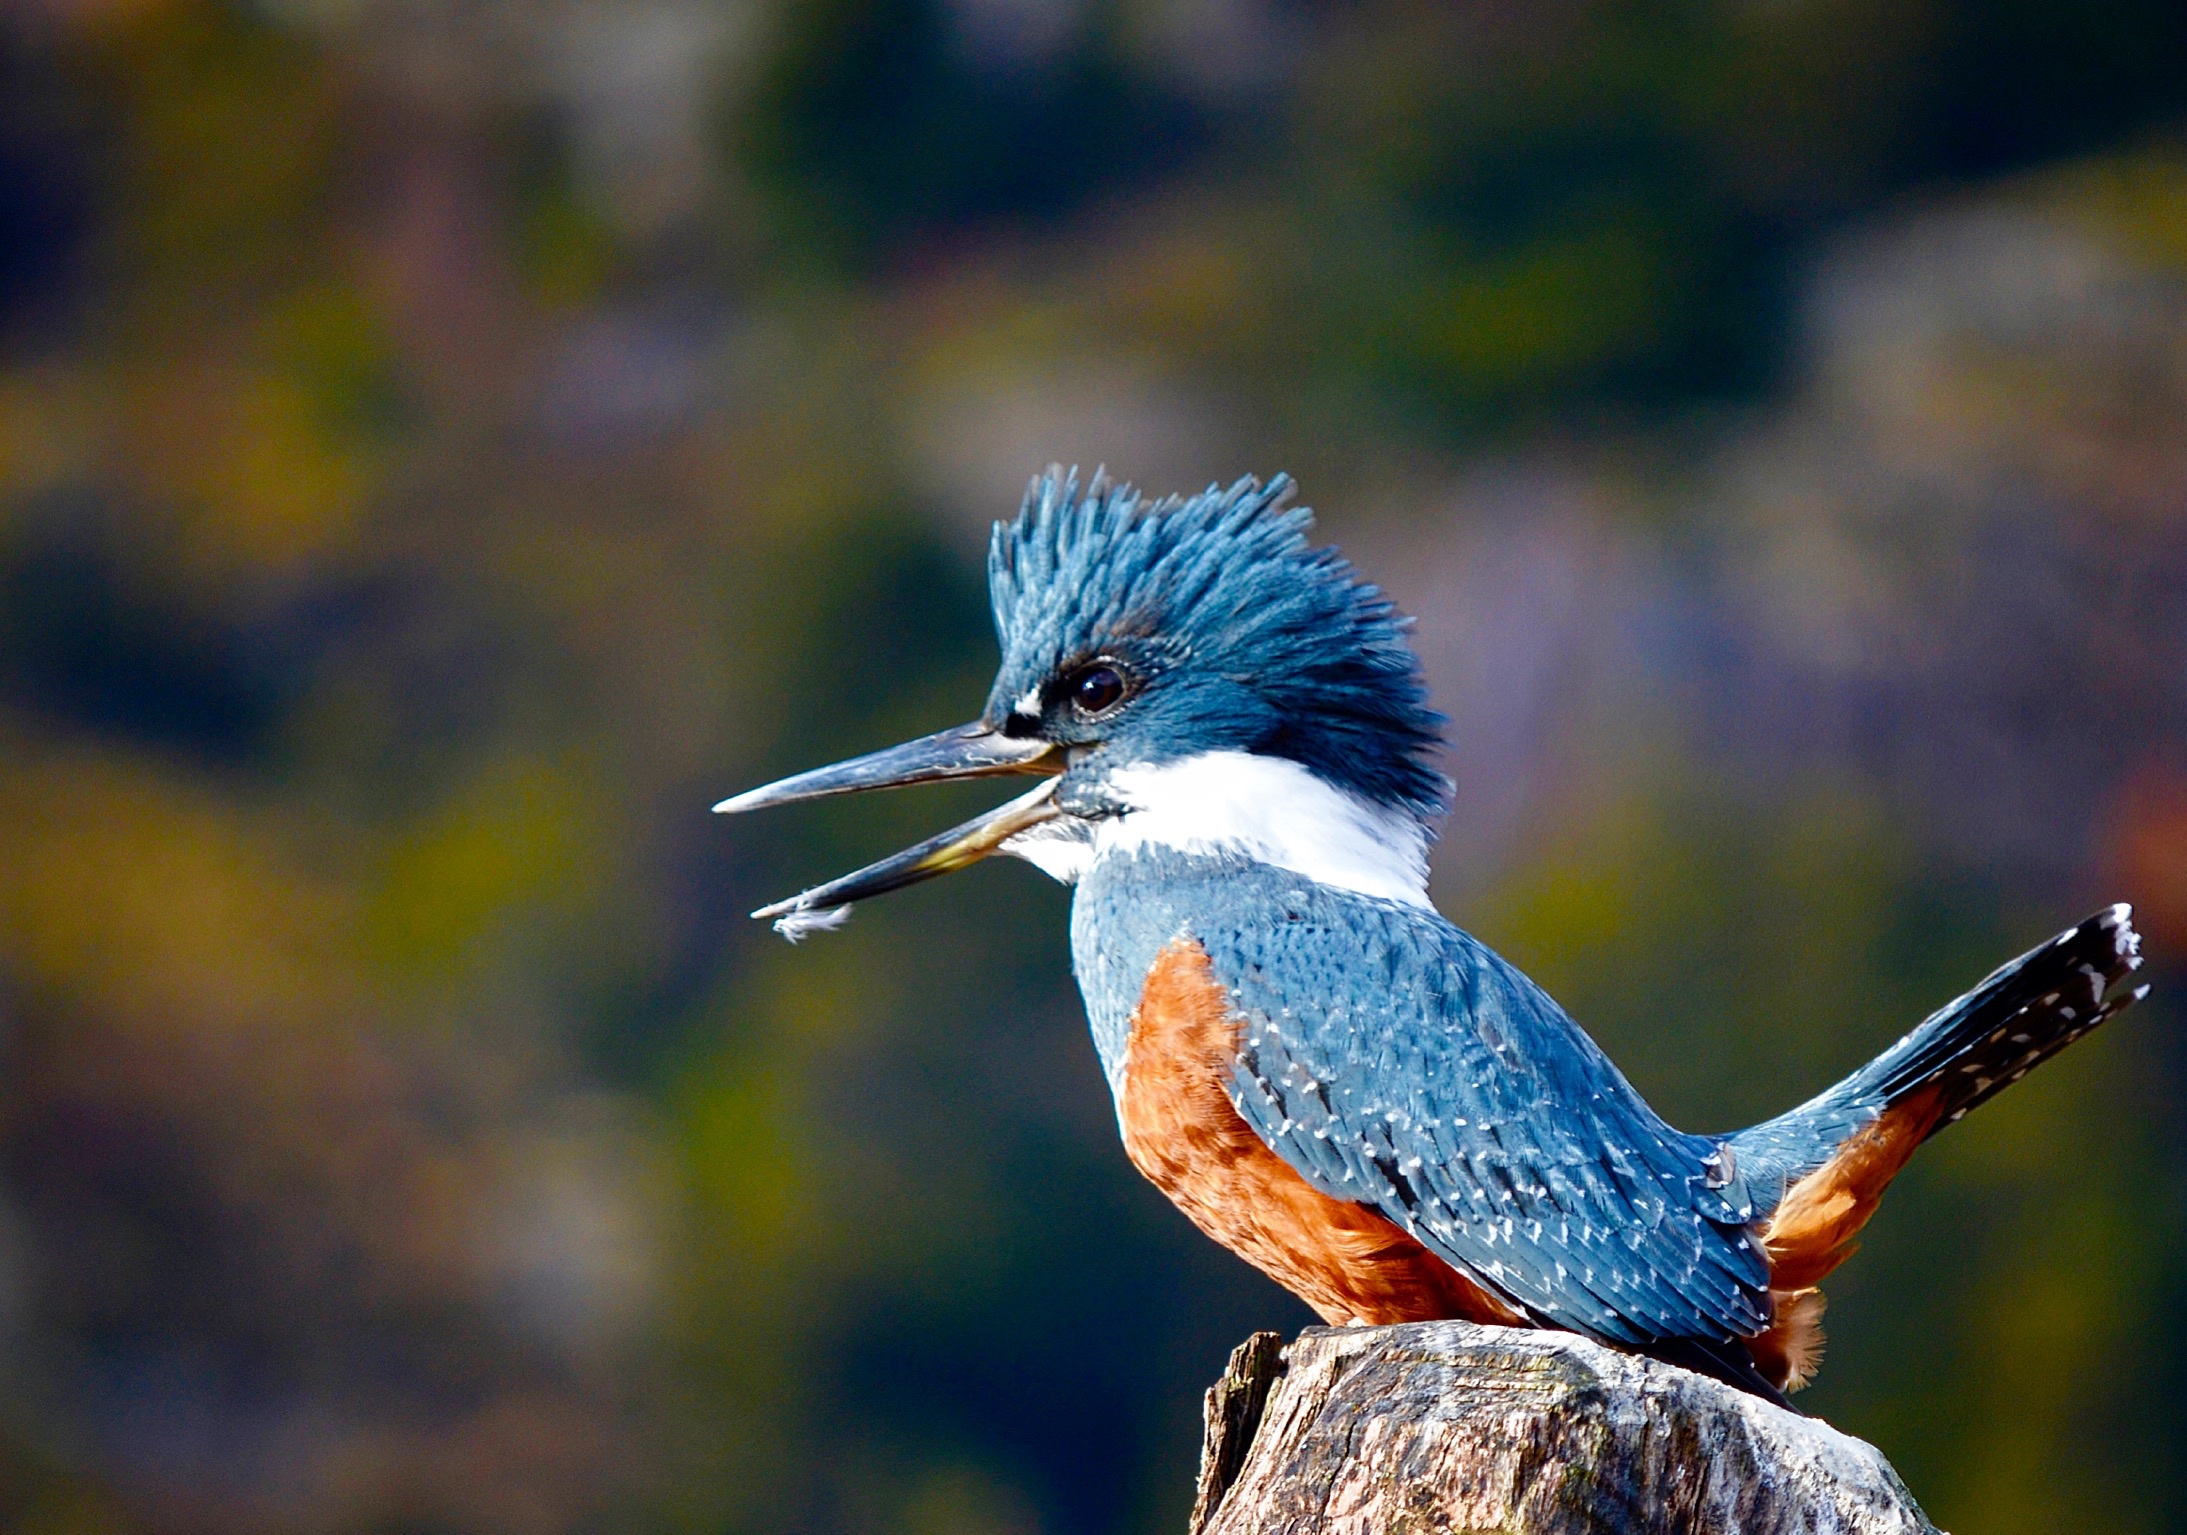 A Kingfisher Comes to Visit